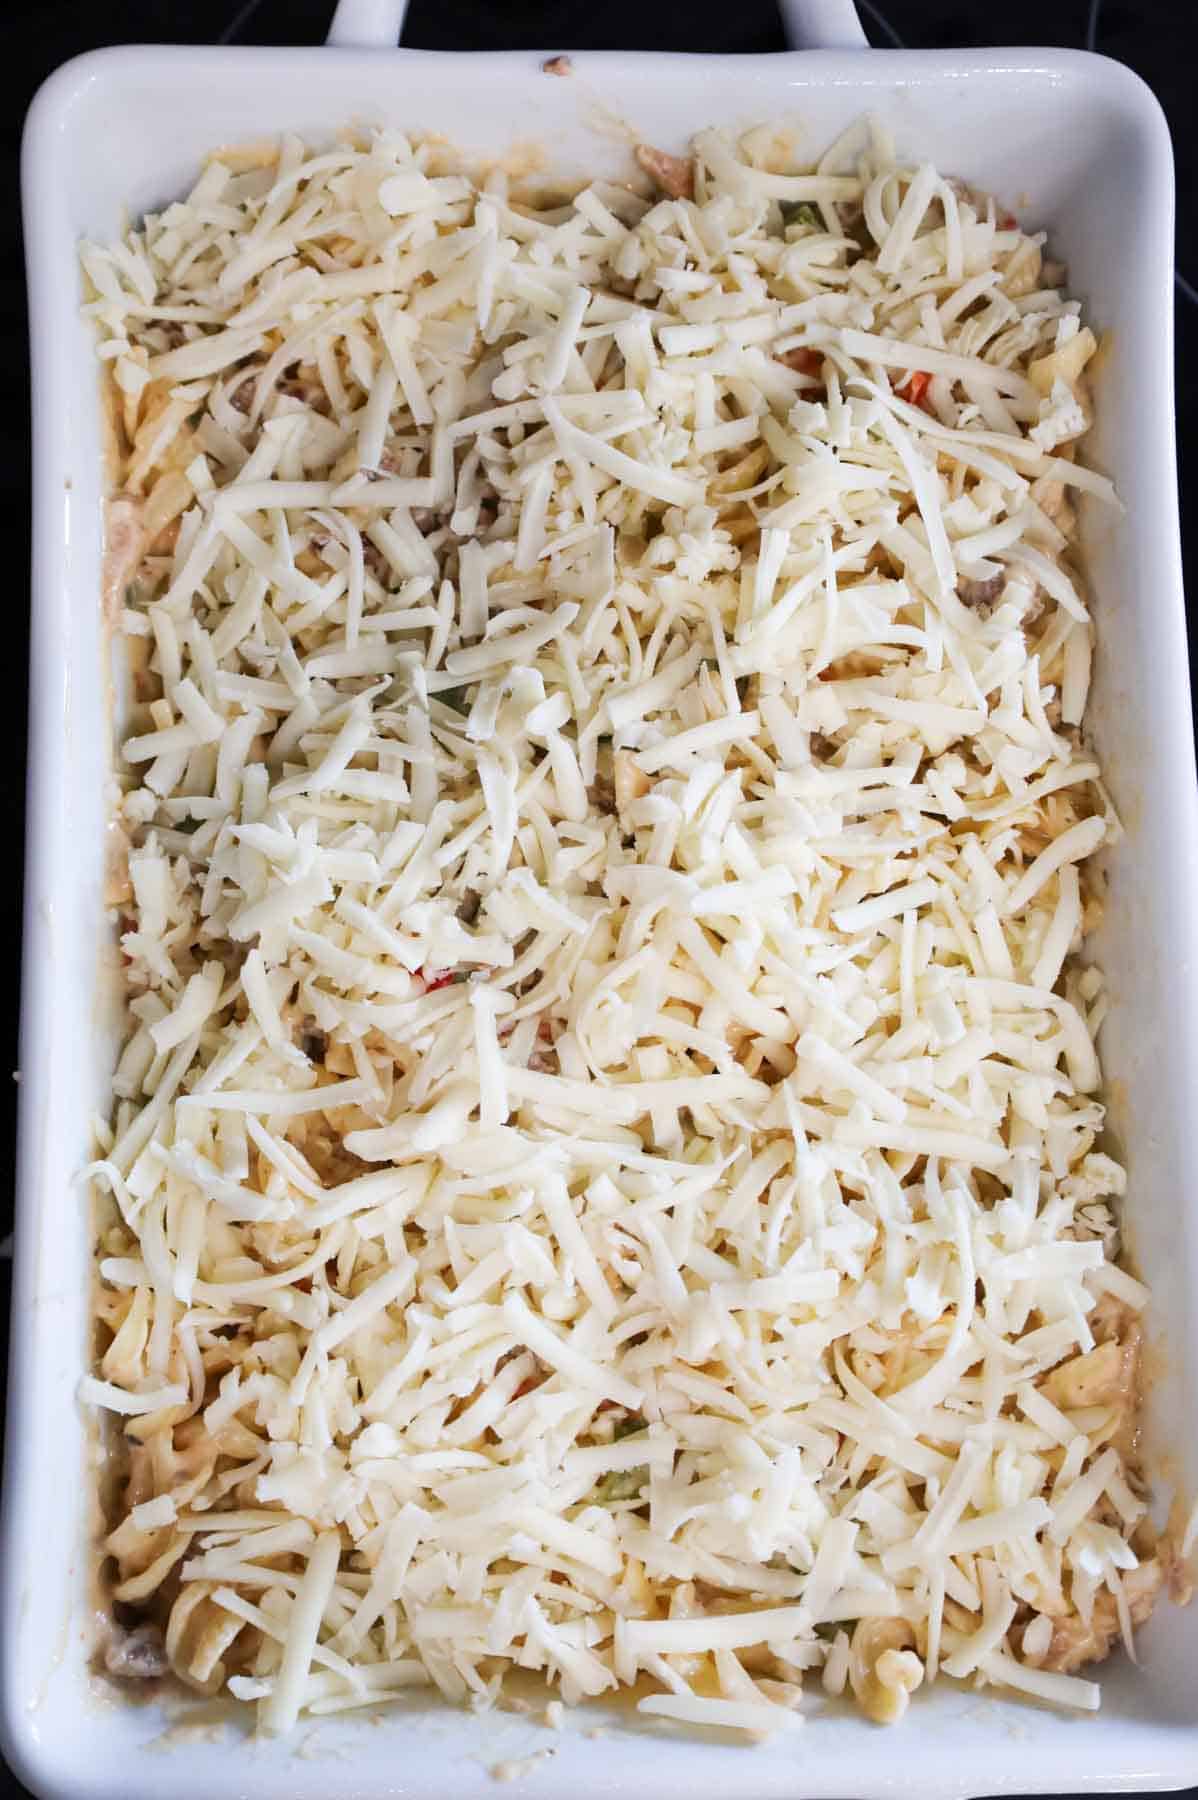 shredded provolone cheese on top of sausage noodle casserole in a baking dish